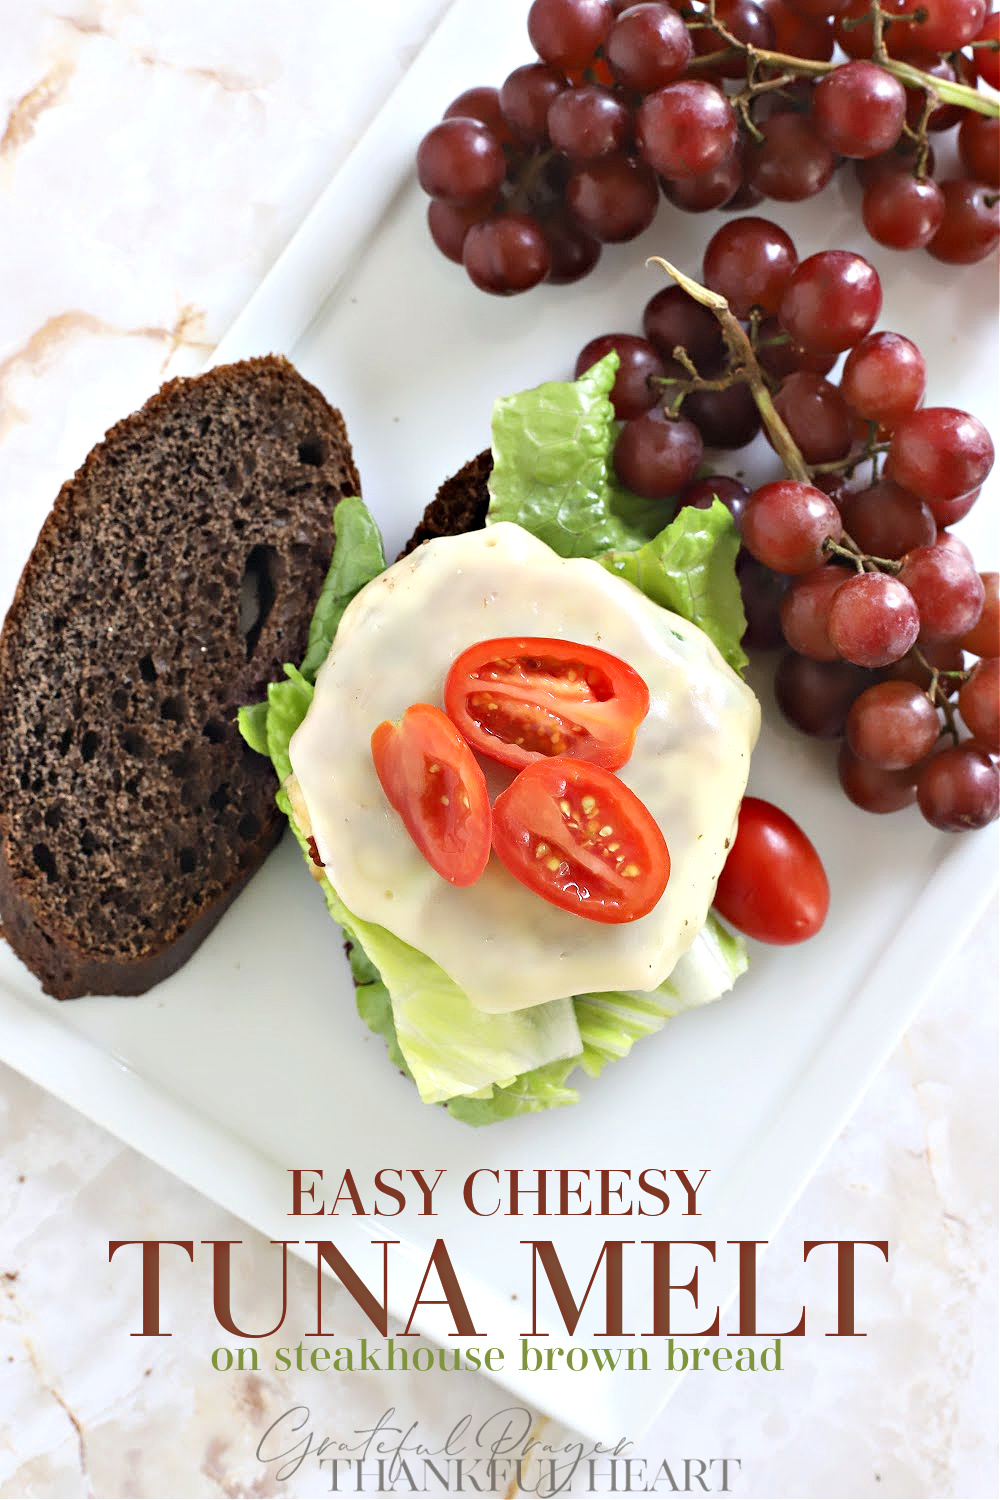 Easy cheesy tuna melt. Classic tuna melt patties are really simple to make and make a warm and tasty lunch or light dinner. Serve on steakhouse brown bread, toasted bun or English Muffin.